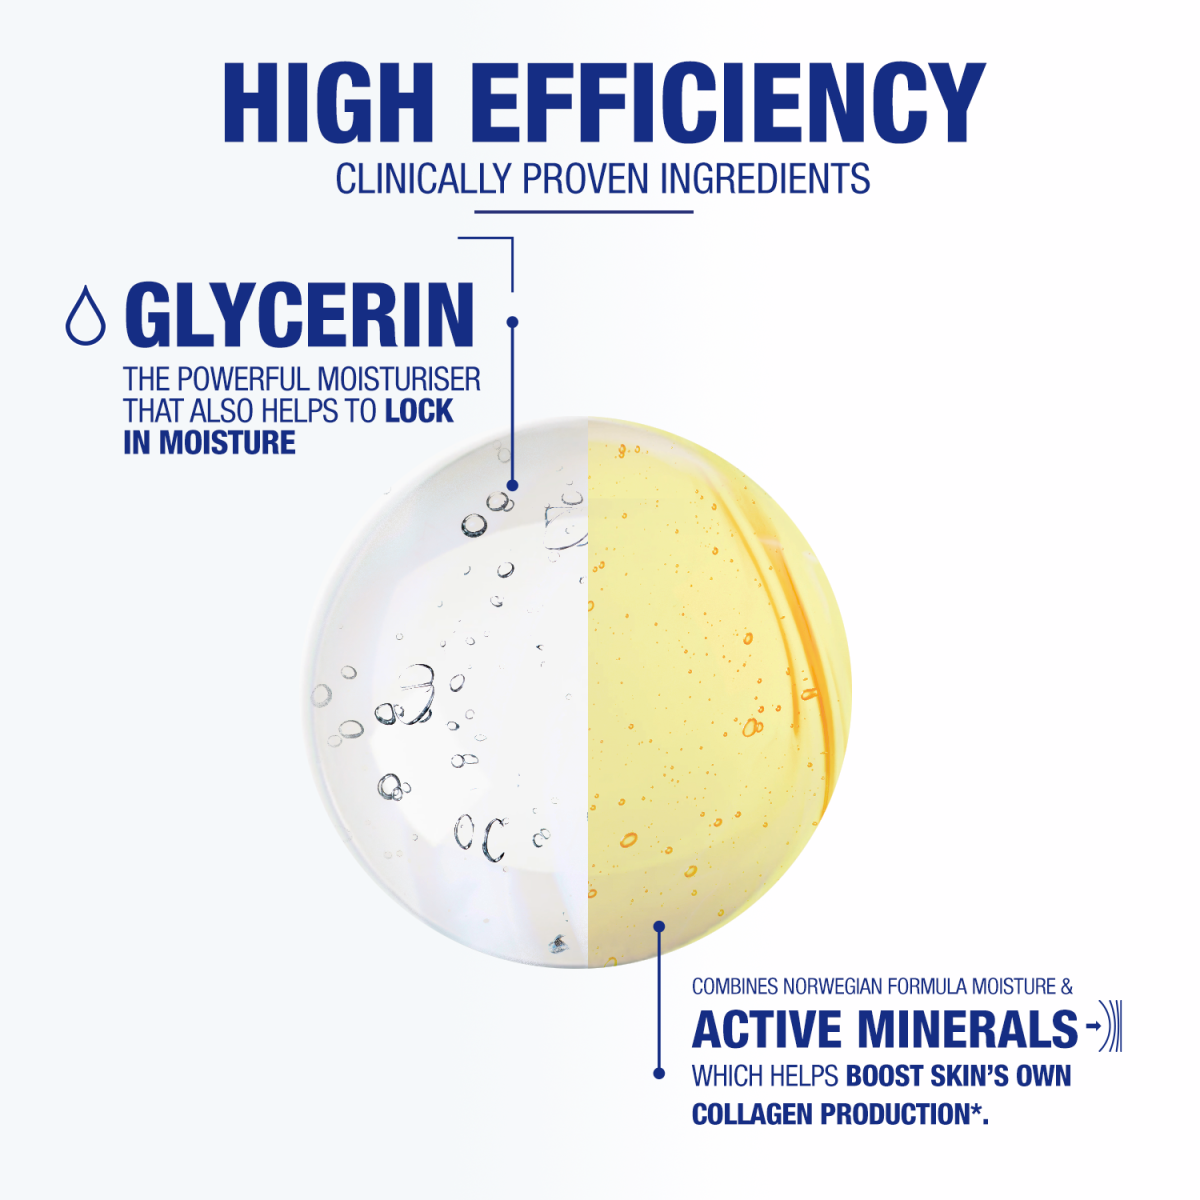 High Efficiency clinically proven ingredients, glycerin and active minerals.